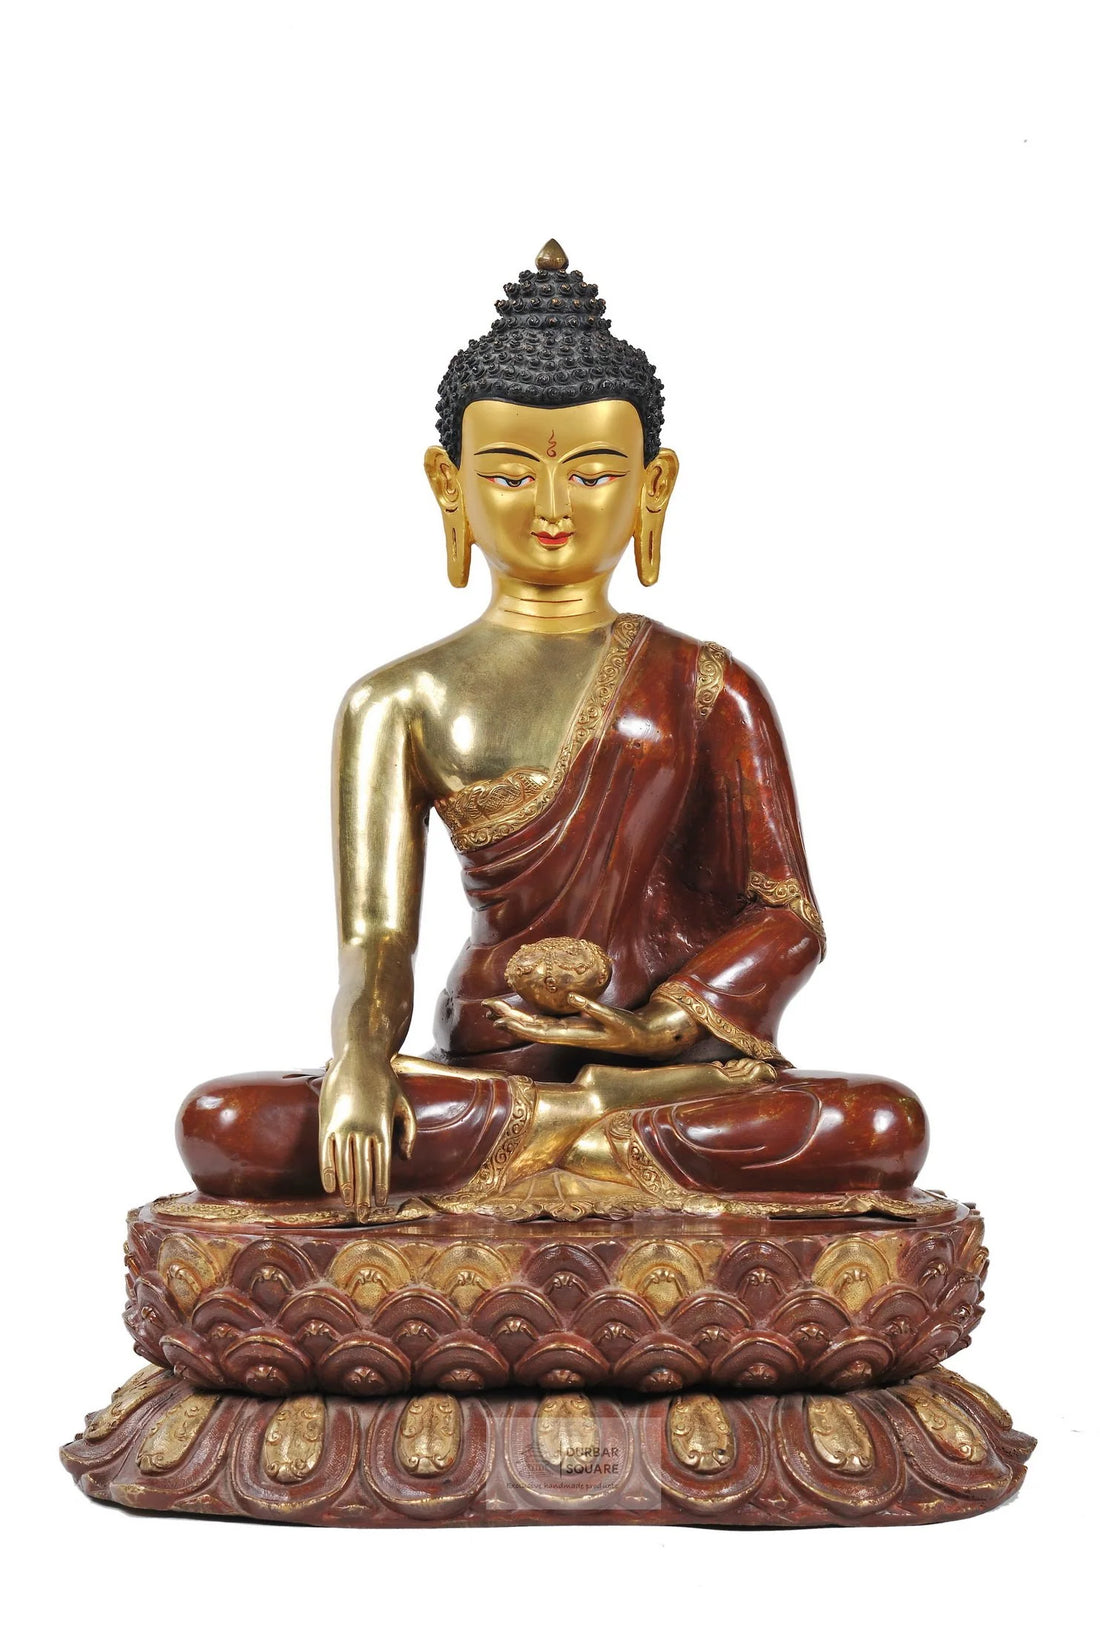 Wondering where to place the Buddha statue in your home?